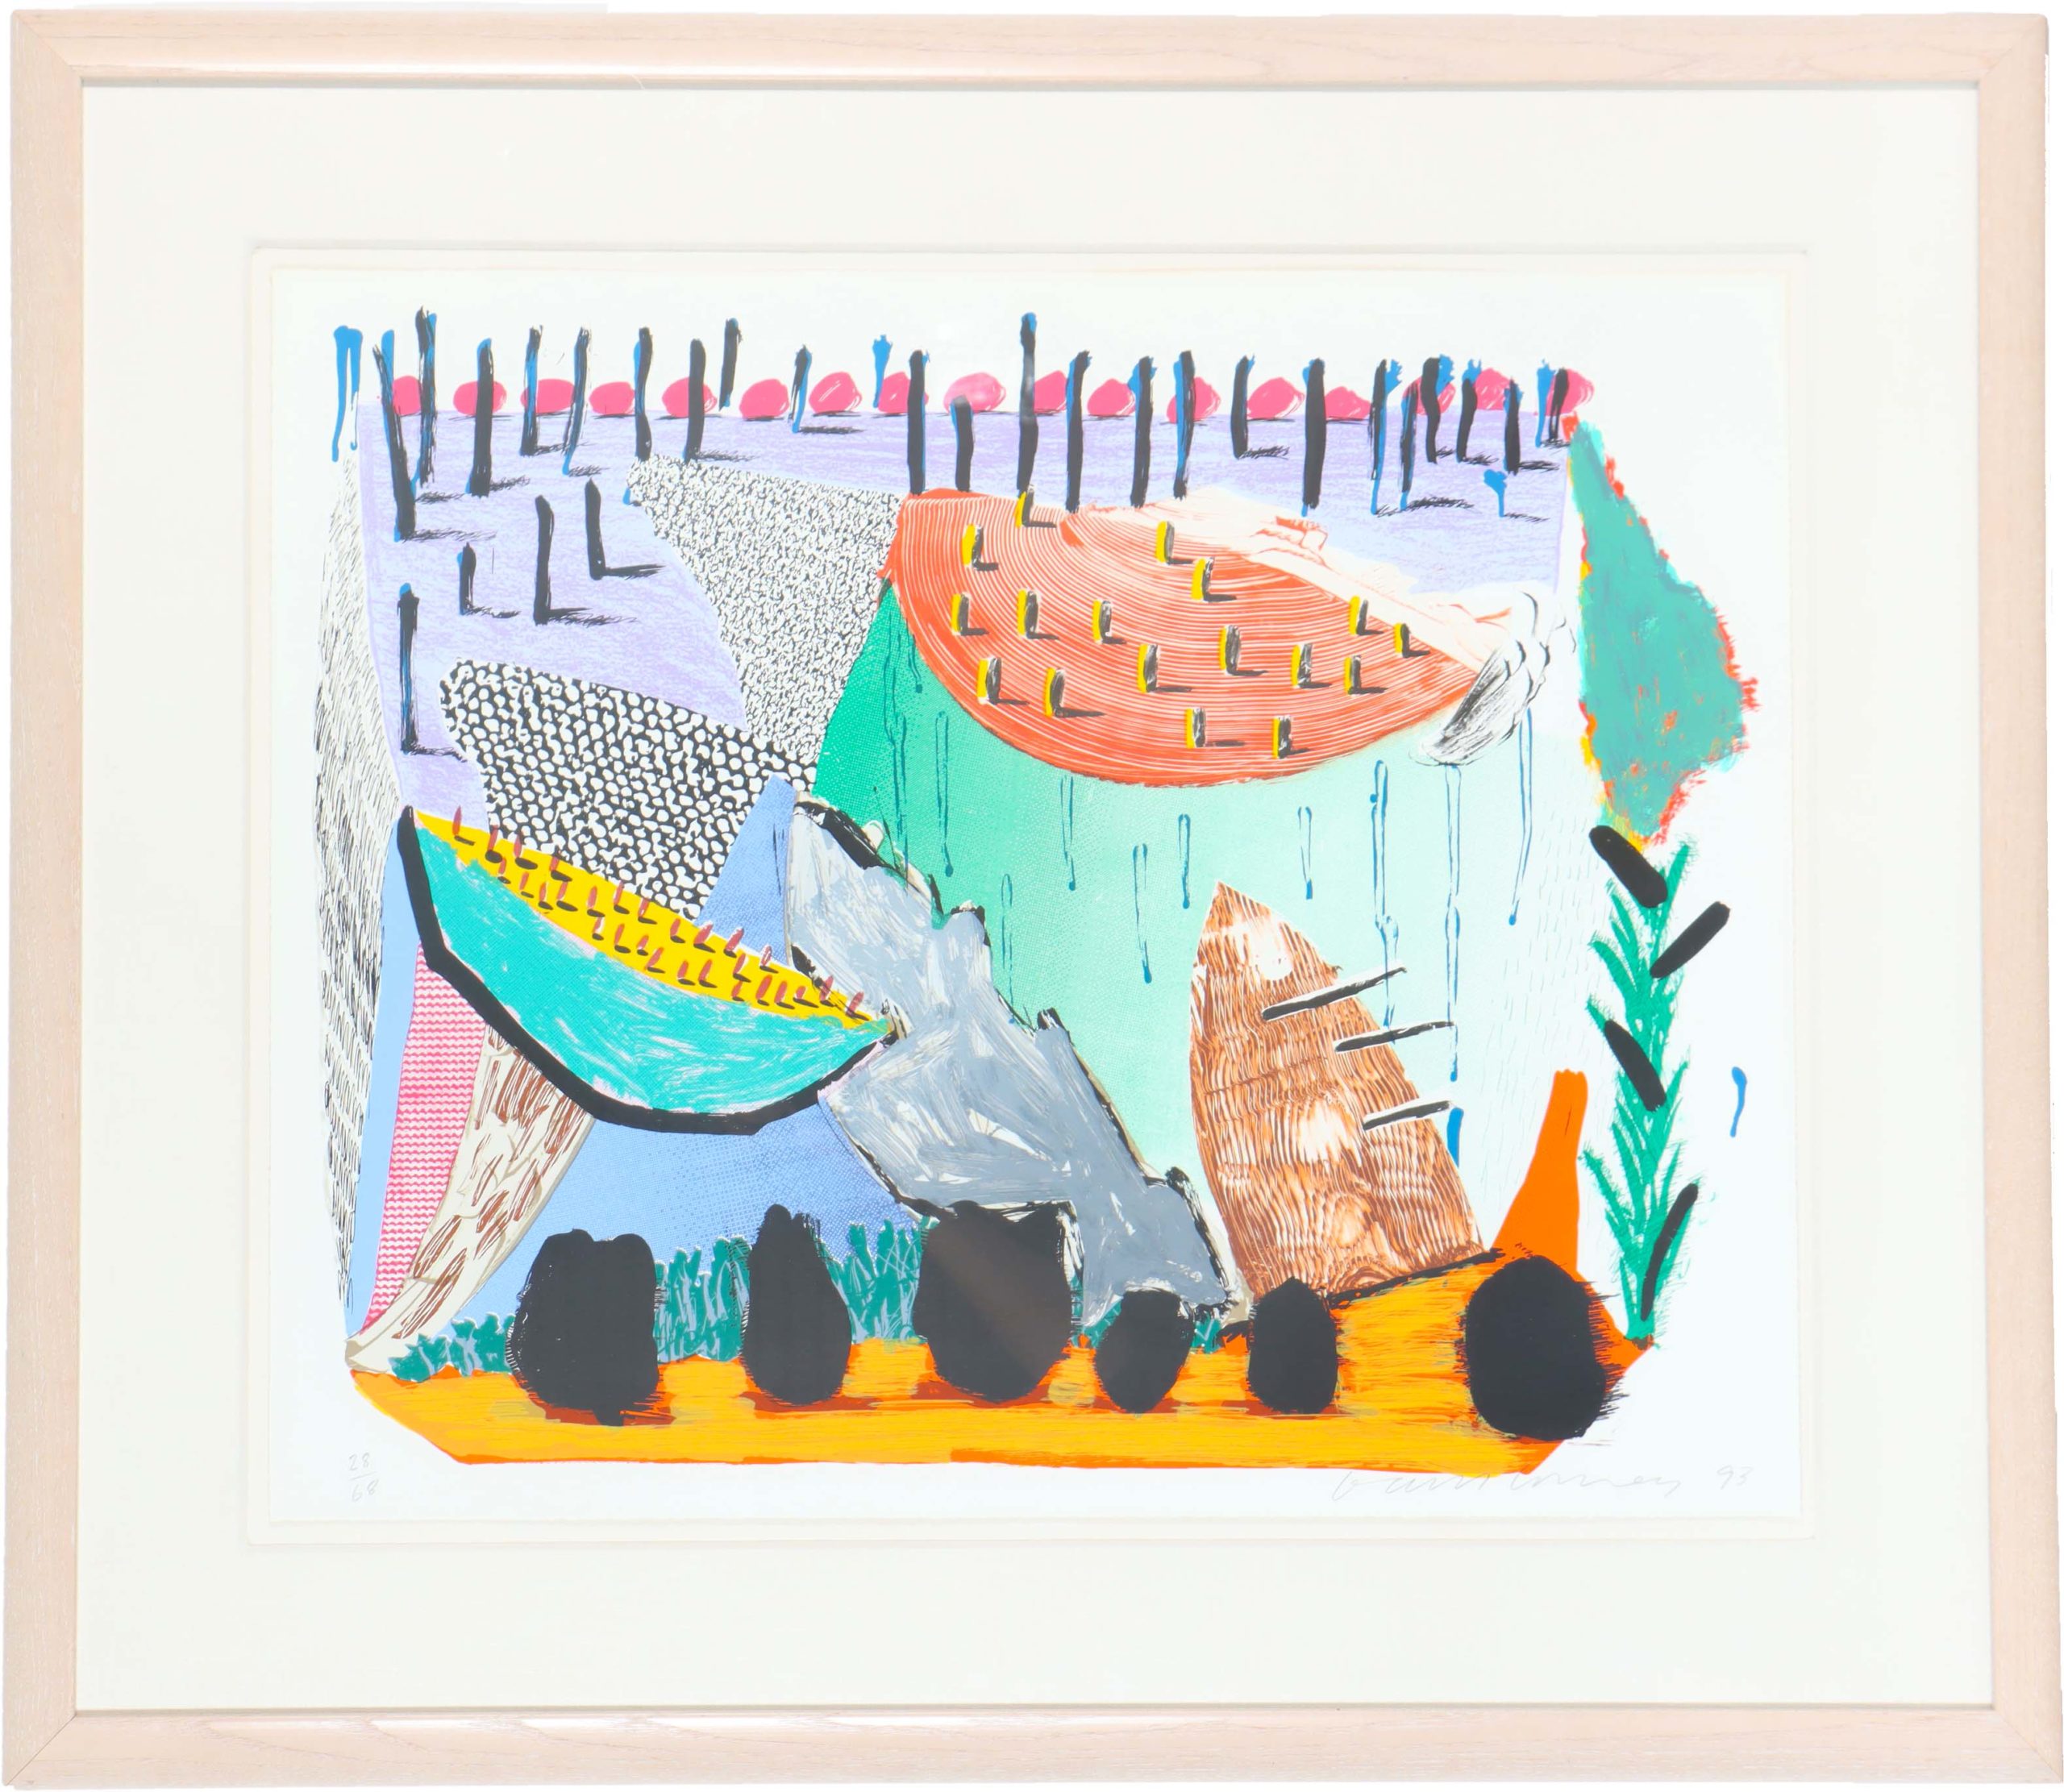 You are currently viewing David Hockney (b 1937) Lithograph-Screenprint “Slow Rise” 28 of 68